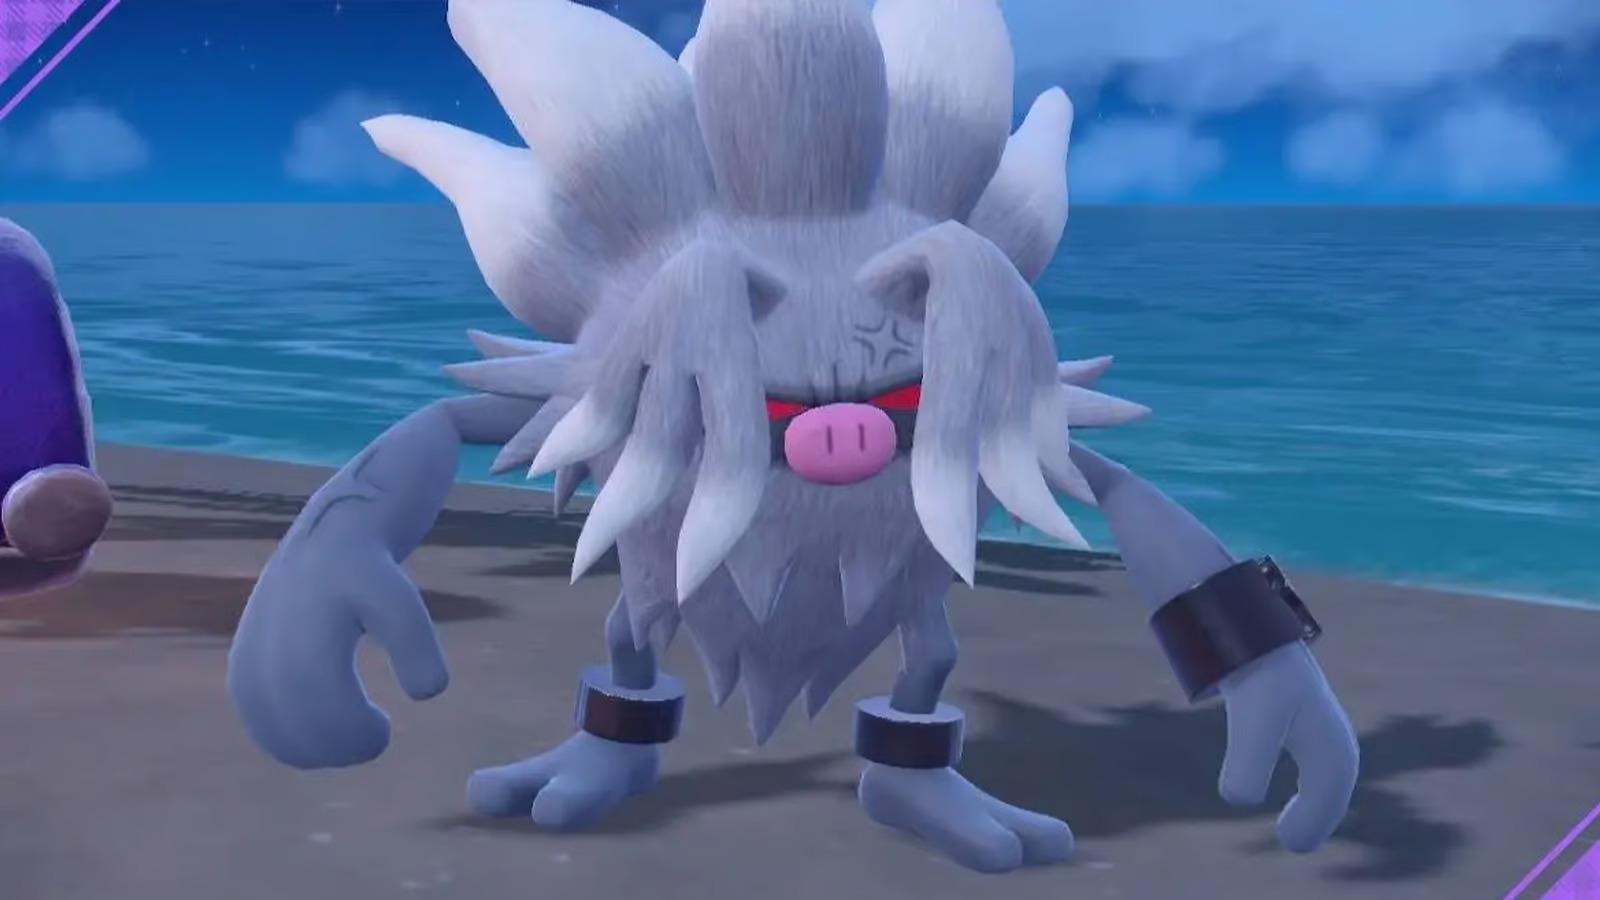 Pokémon GO on X: Get furious! Annihilape, the Rage Monkey Pokémon, will  make its Pokémon GO debut during the Raging Battles event! Don't miss this  opportunity to fight it out this week